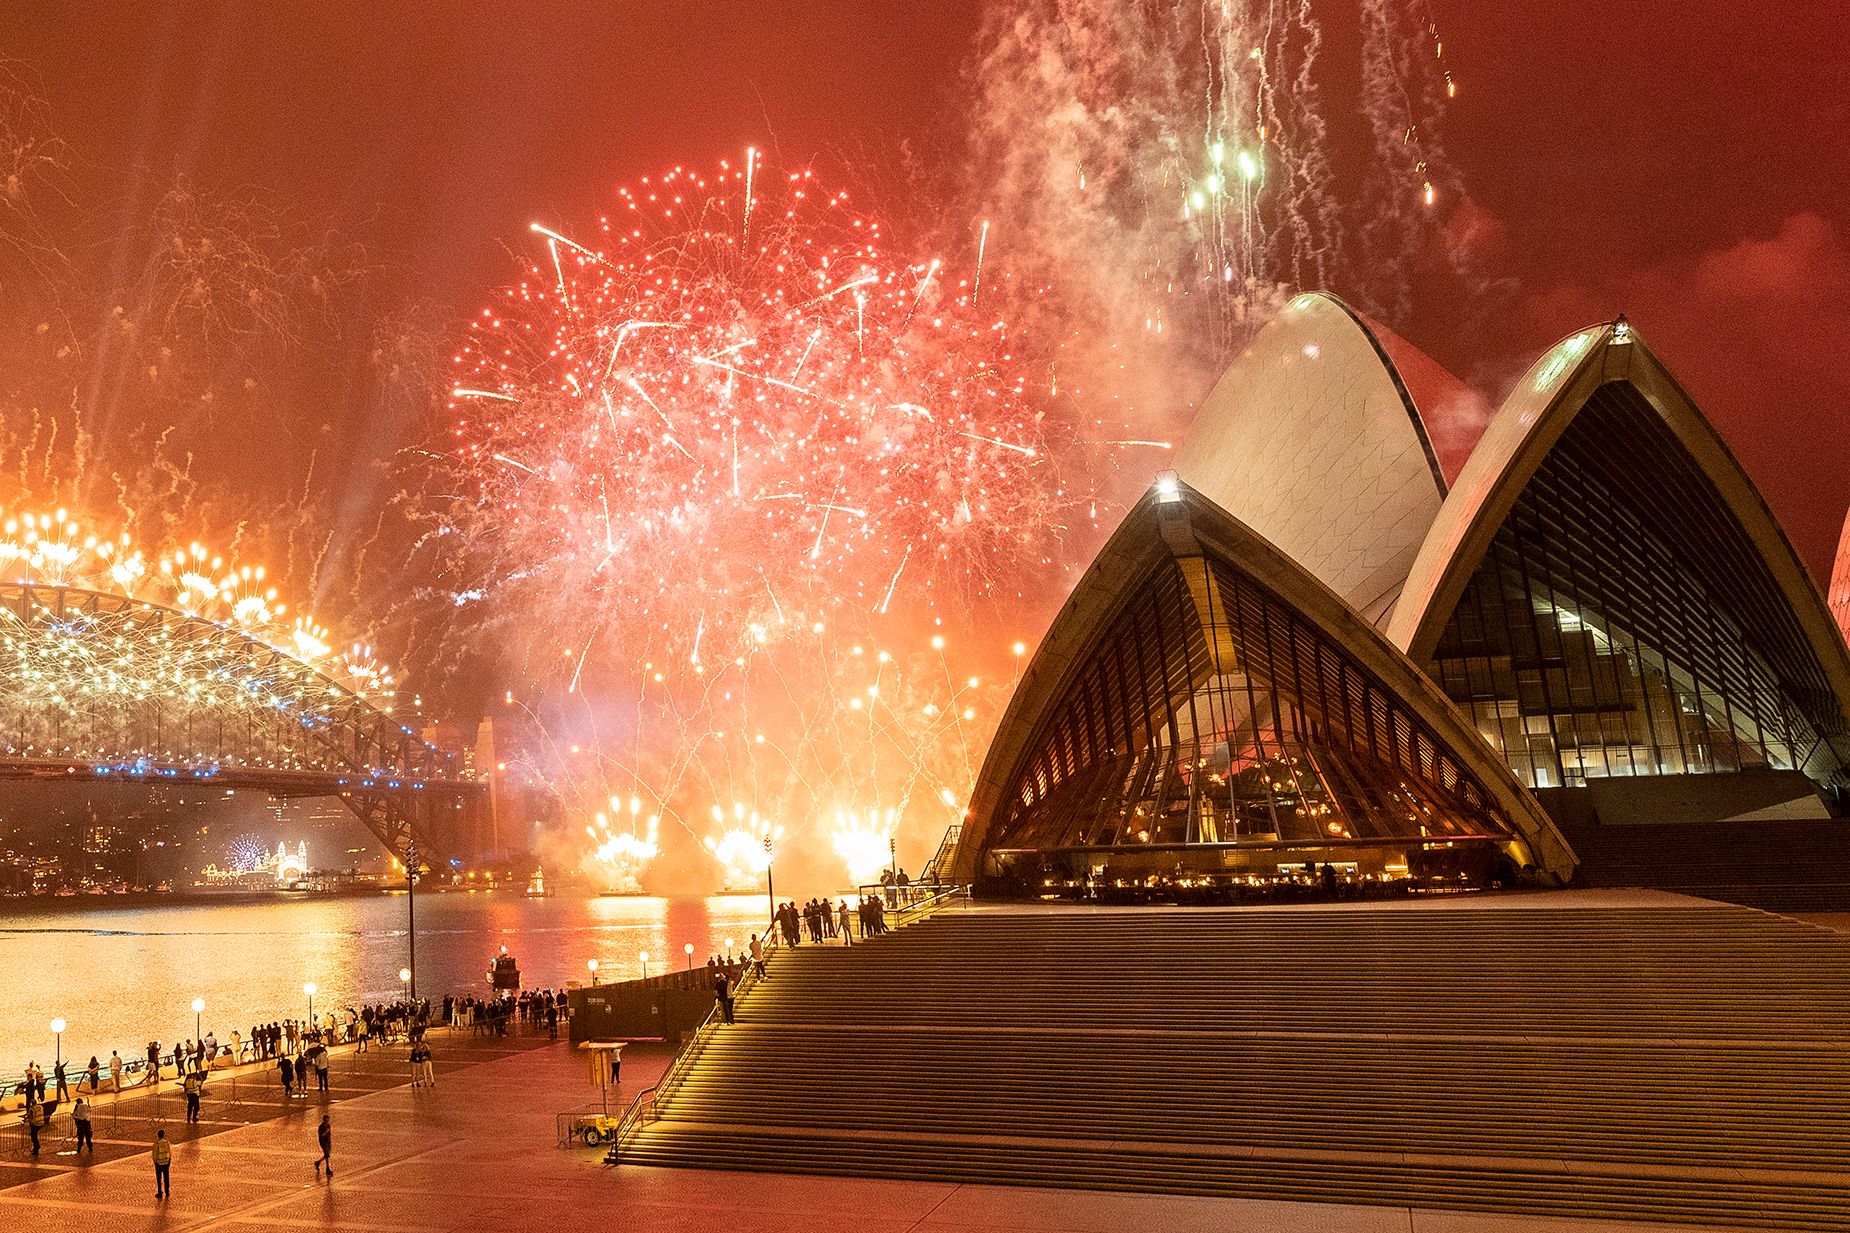 10 great places for New Year's Eve fireworks and more